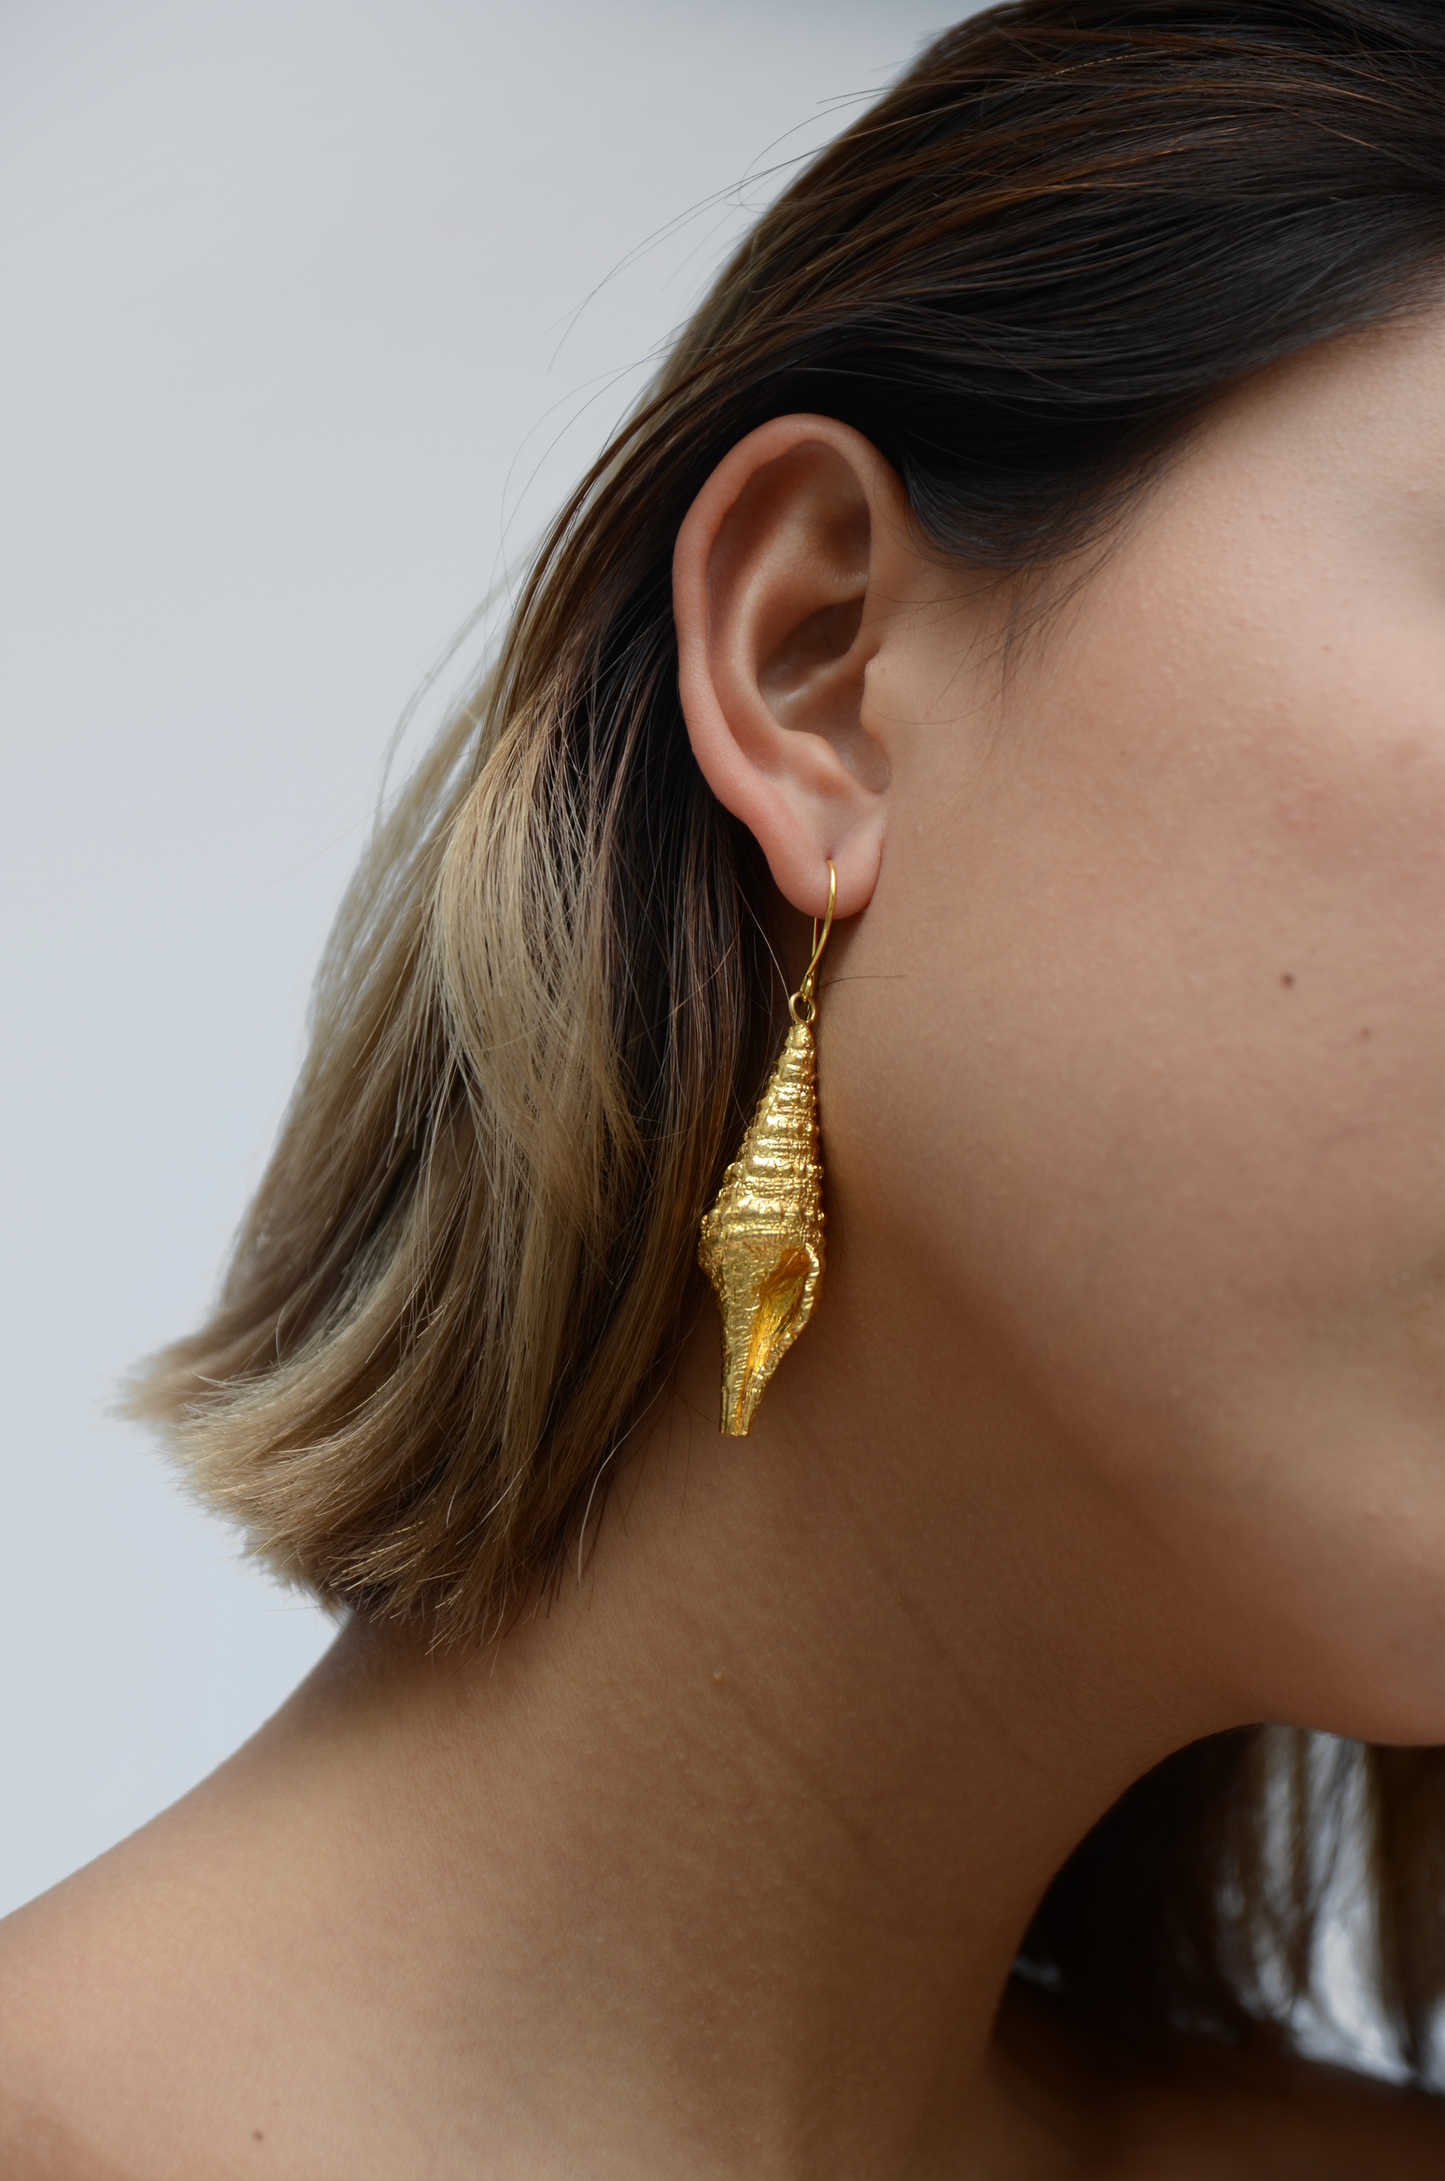 Coquillage Earrings